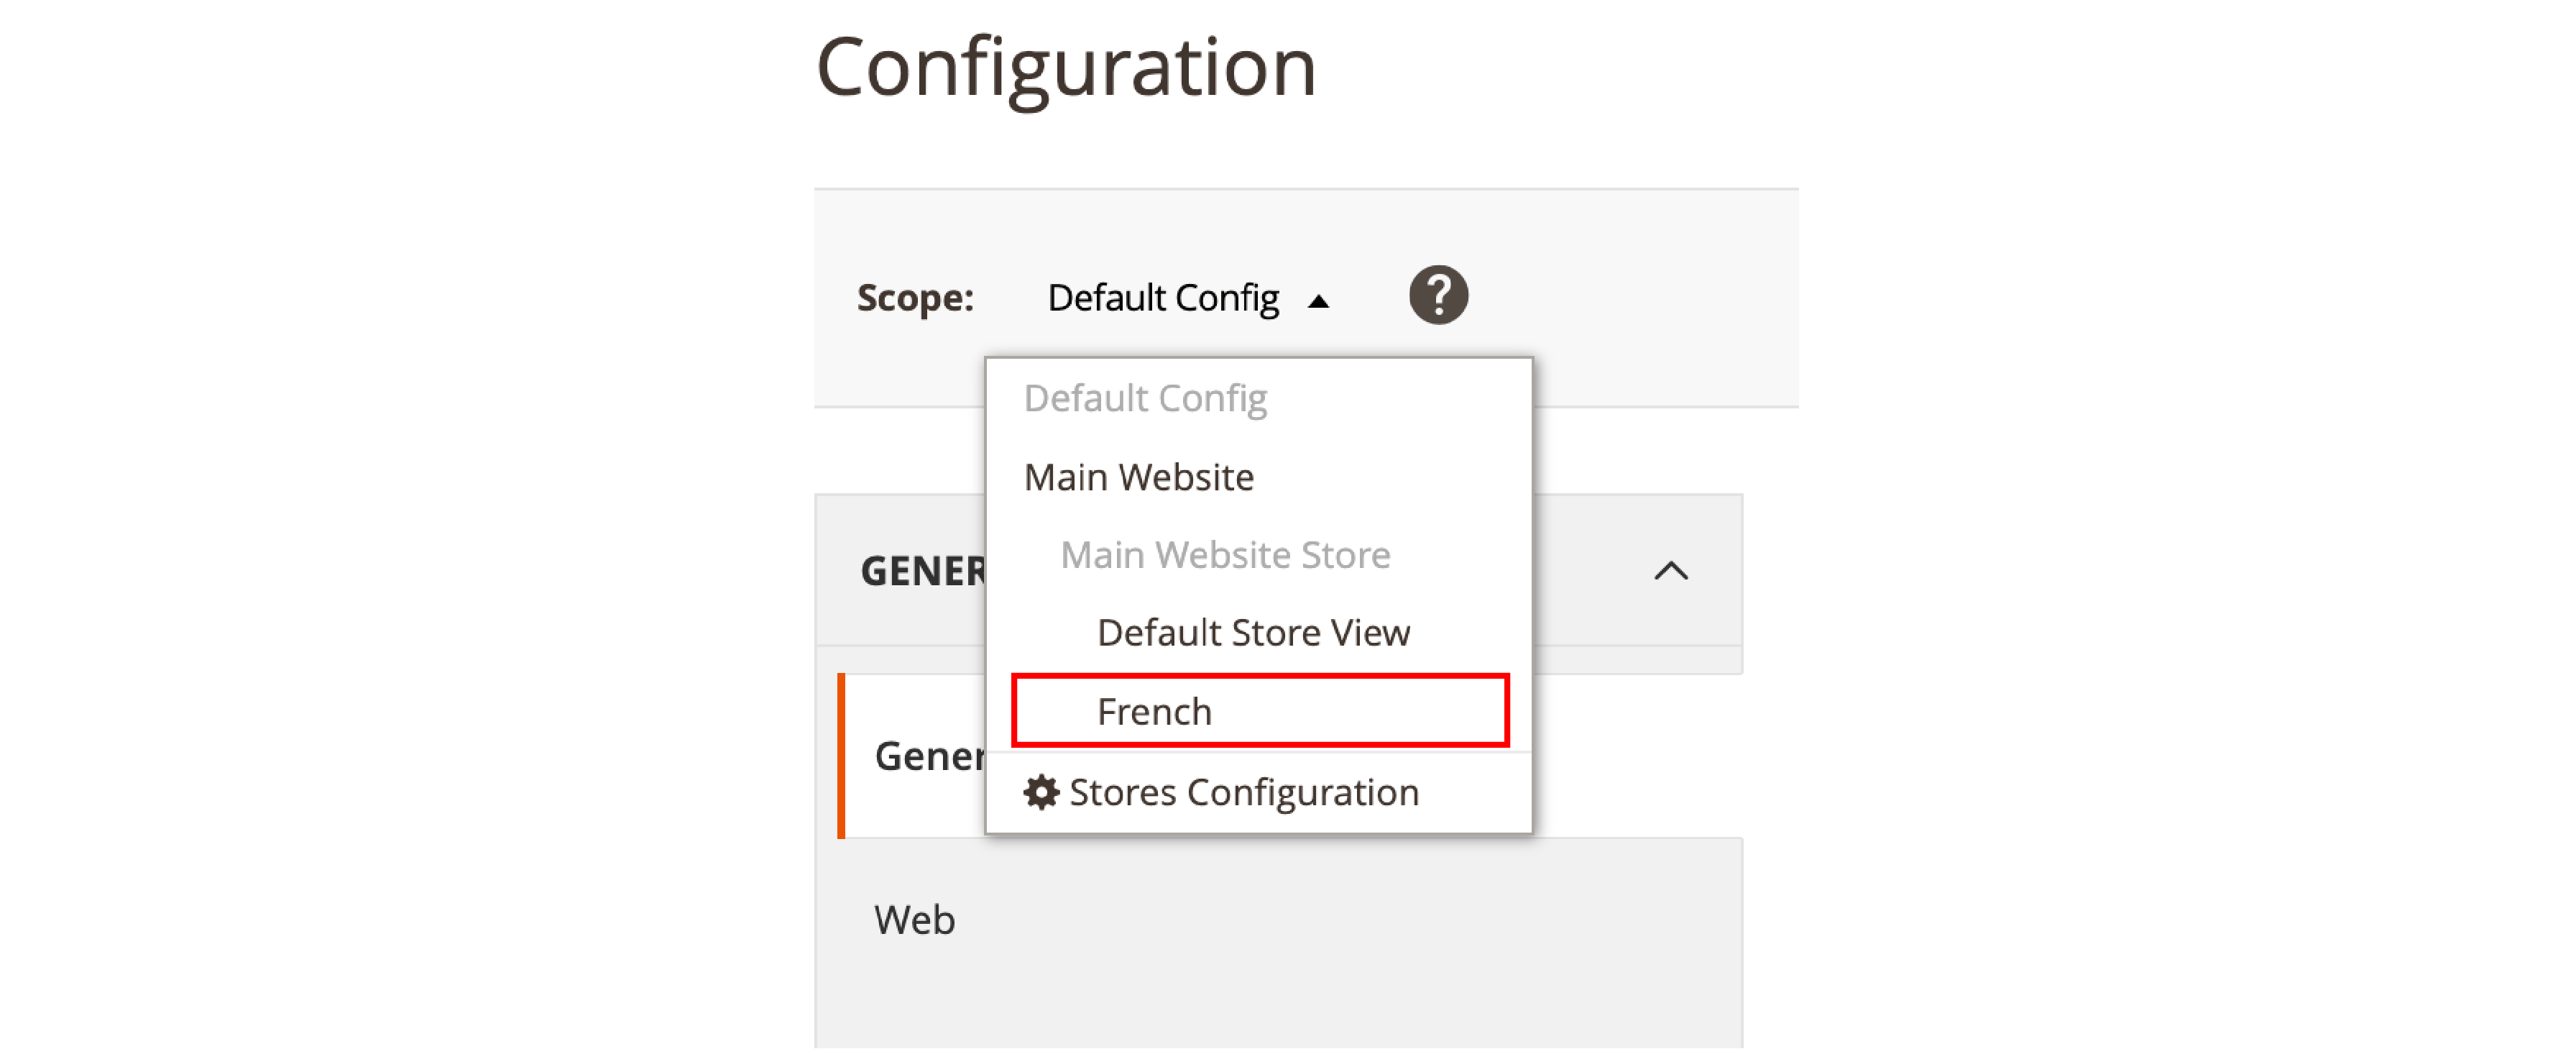 Navigating to Store View in Magento 2 Multi-Language